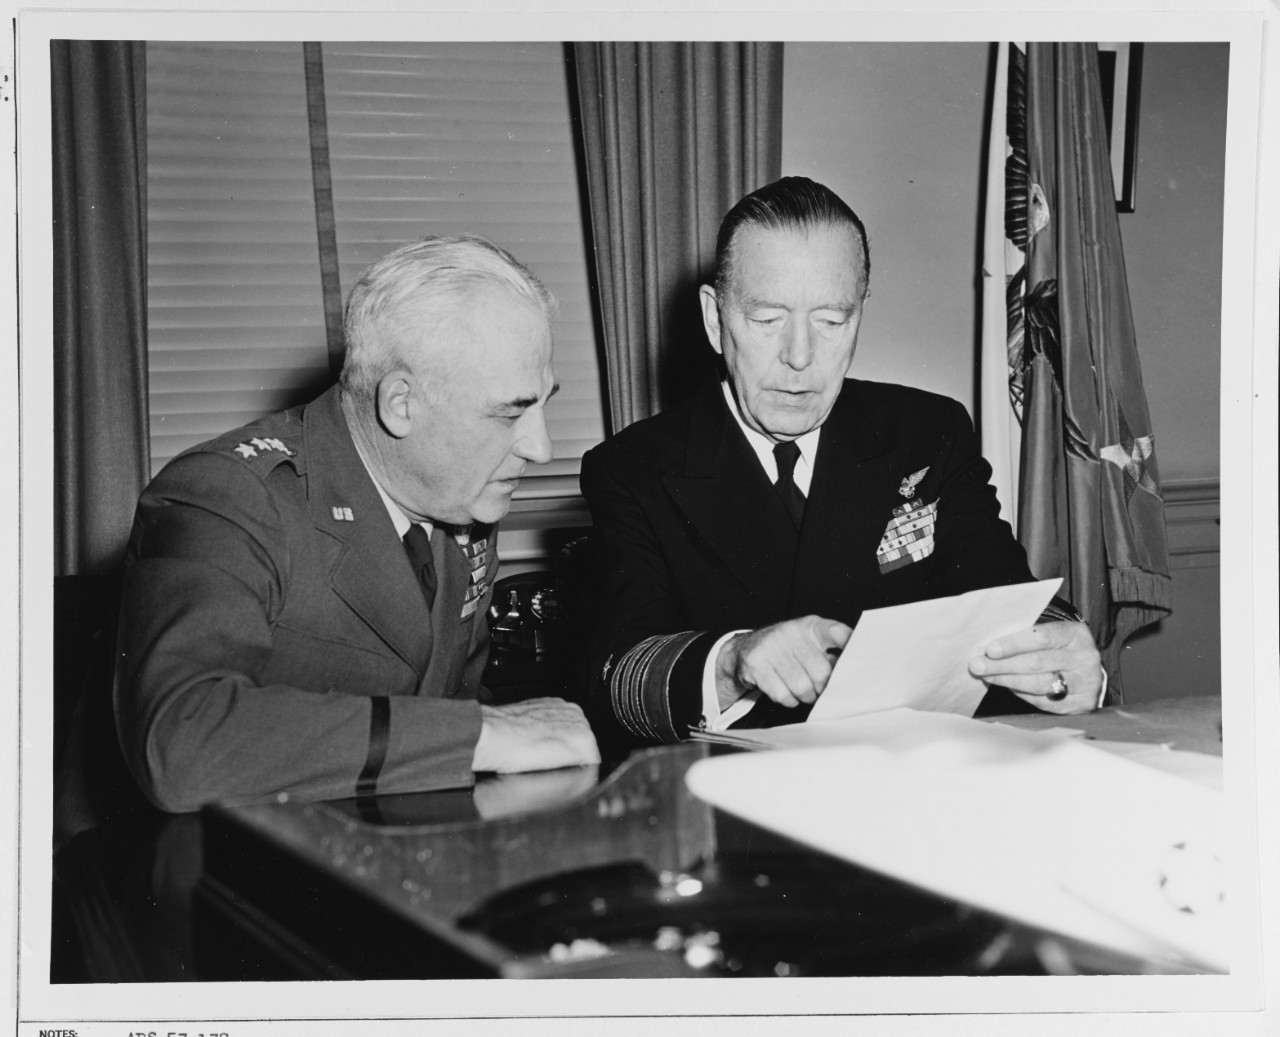 Admiral Arthur W. Radford (right), Chairman, Jcofs, confers with General Nathan F. Twining, (left), Newly designated Chairman of Jcofs